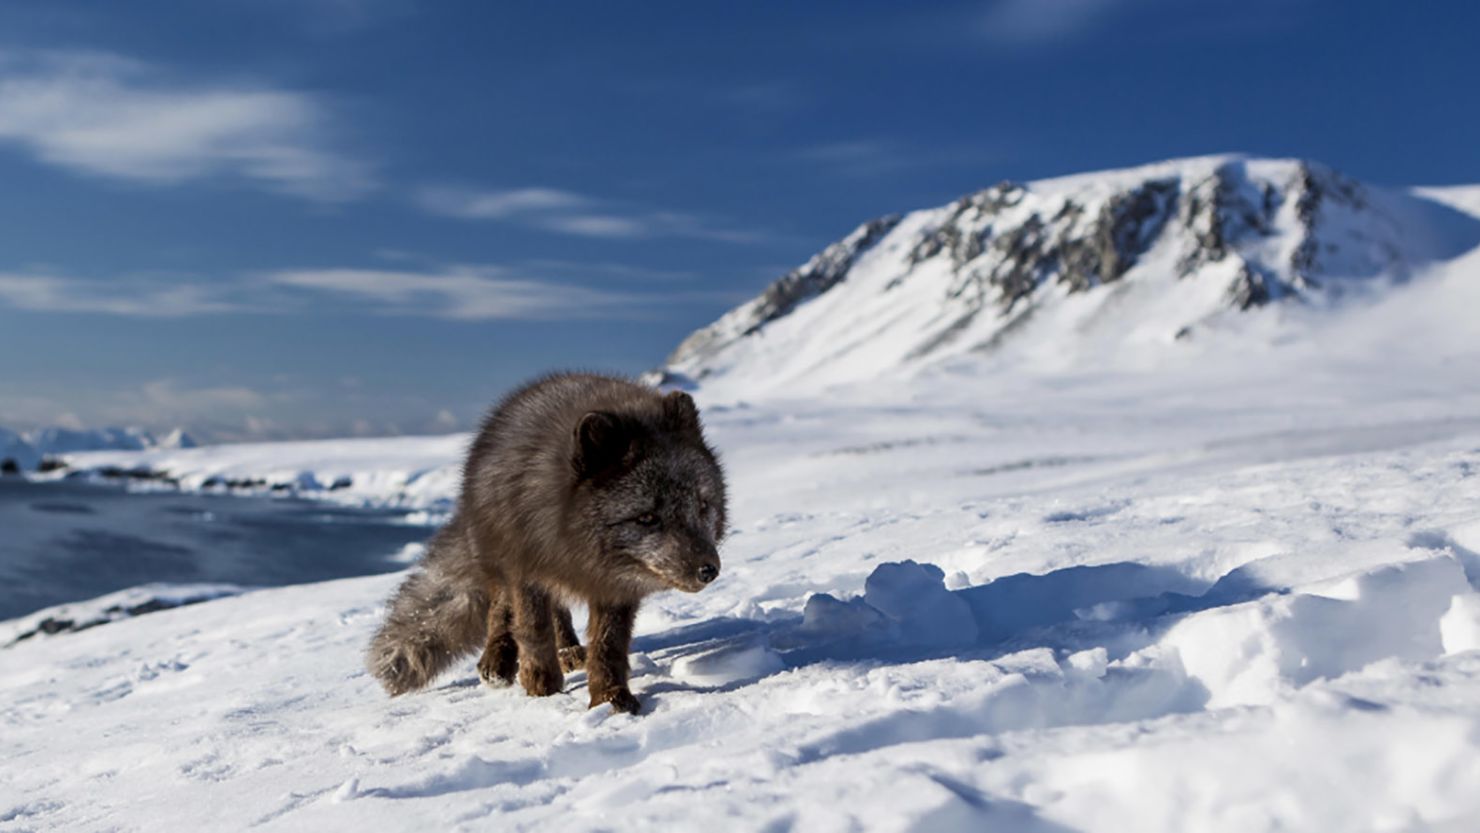 The young female arctic fox covered an incredible distance.